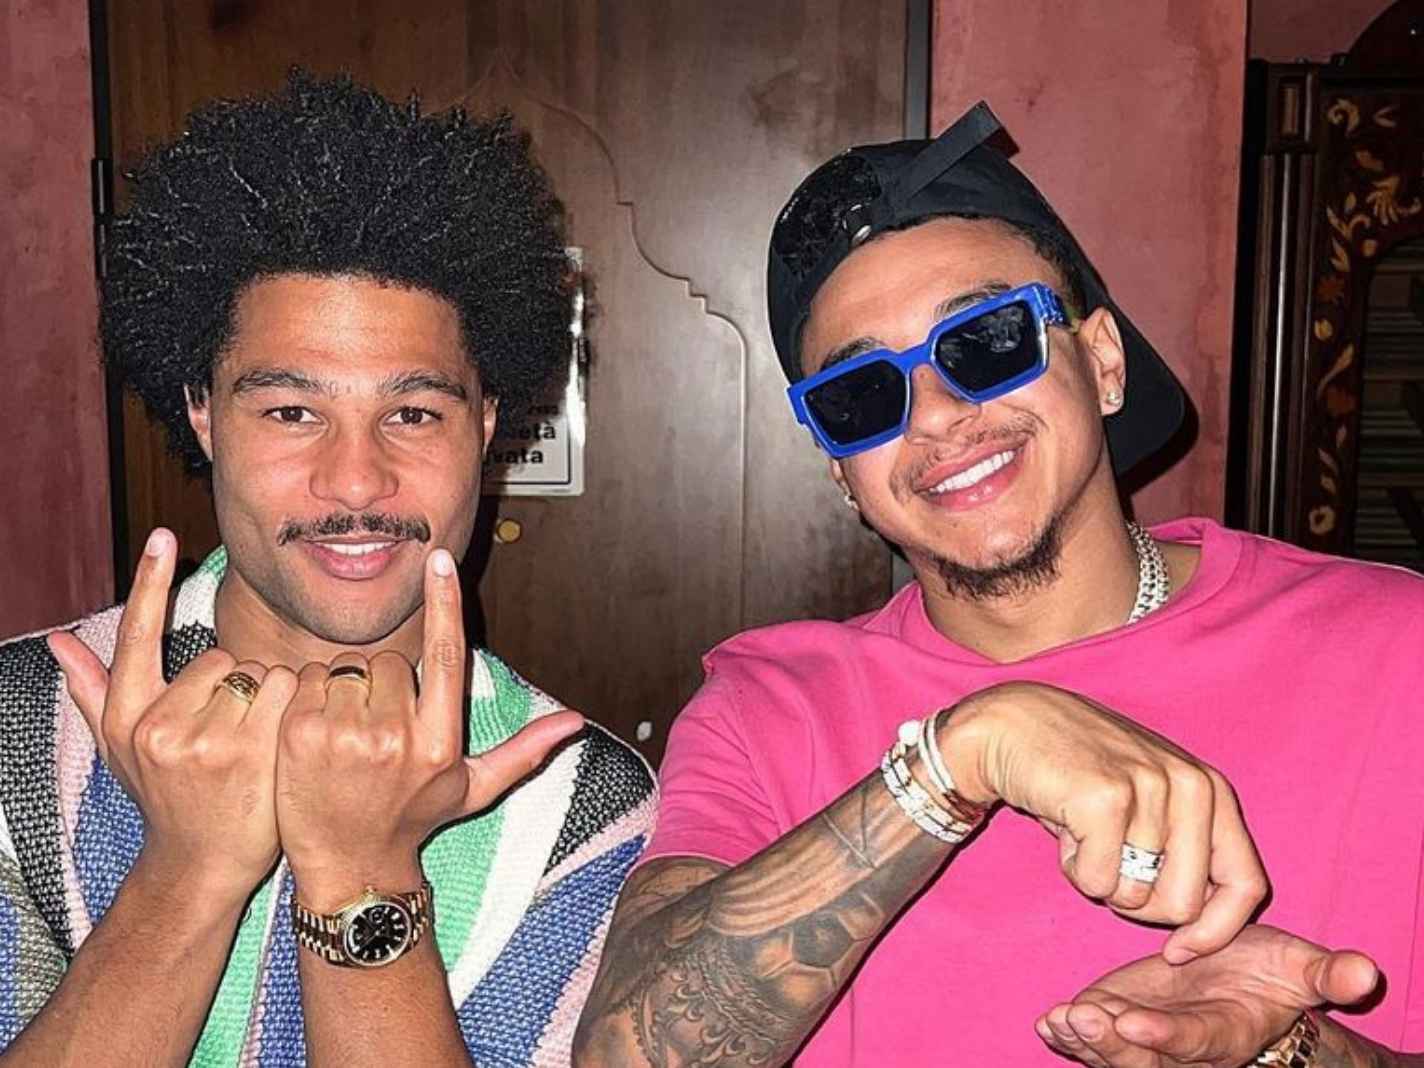 Serge Gnabry and Jesse Lingard show we all have more in common than imagined